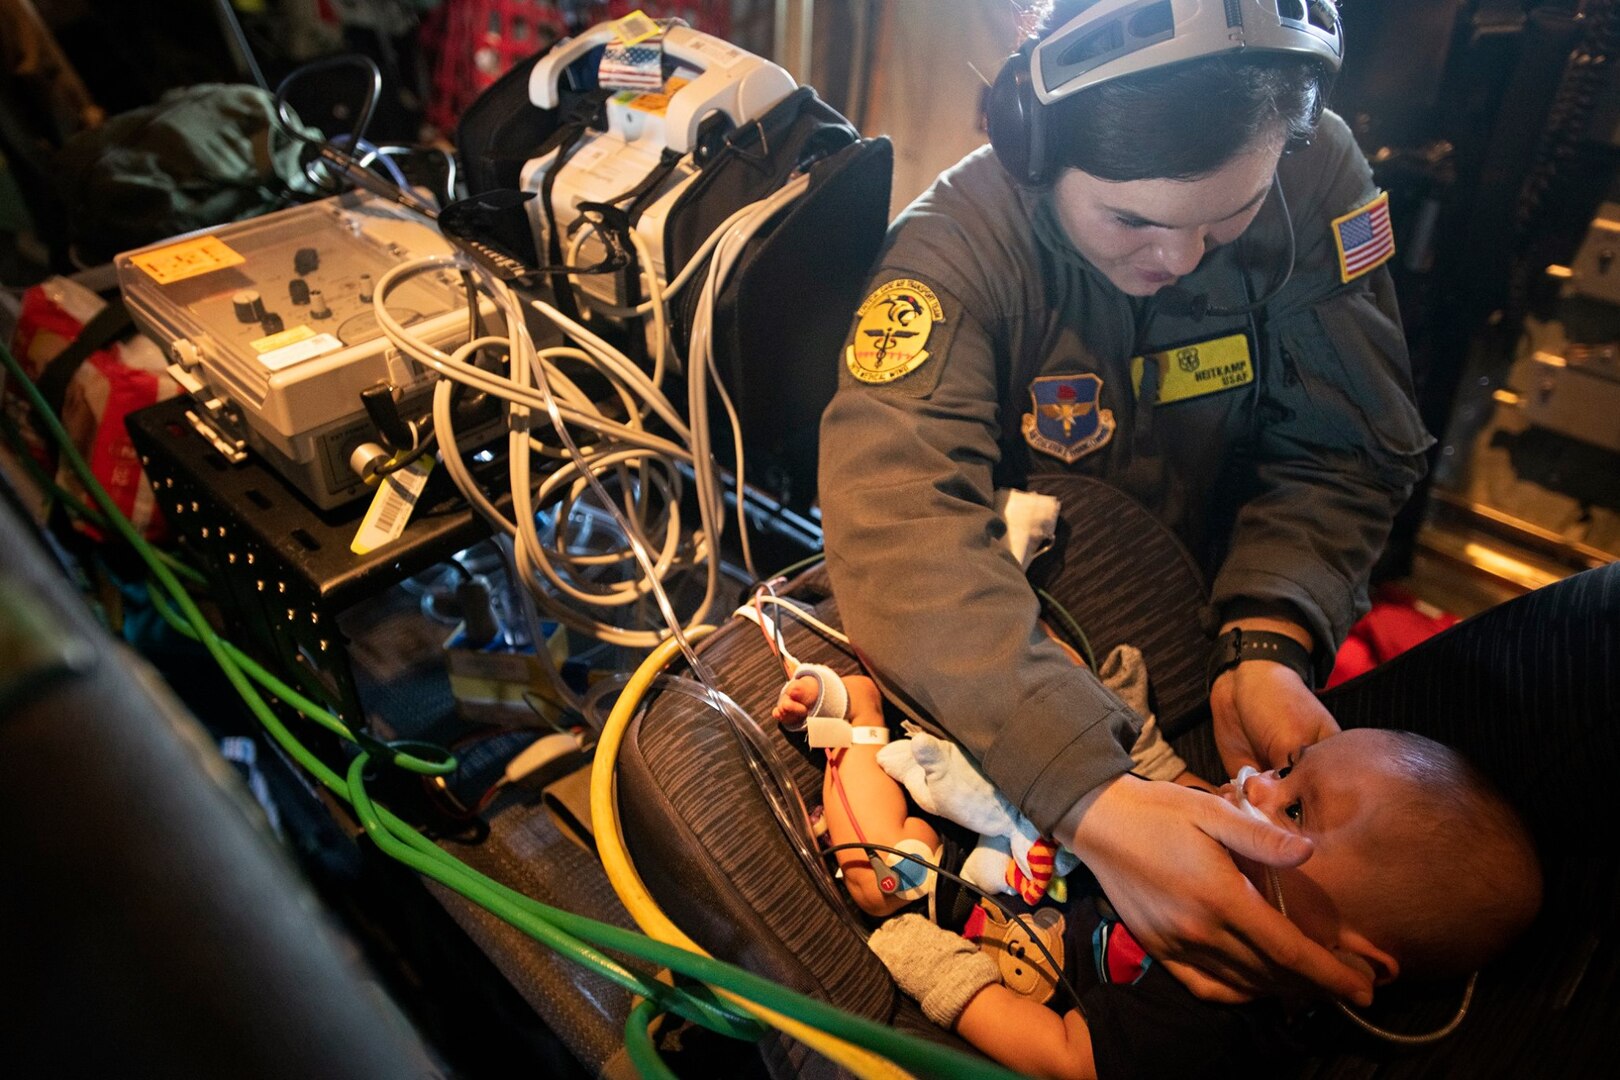 Senior Airman Analiese Heitkamp, 59th Medical Wing critical air transport team respiratory therapist, adjusts 7-month-old patient, Nakoa Crawford’s, hearing protection in flight between Dallas and San Diego, June 7, 2019. Nakoa was born prematurely at 25 weeks and has had significant health issues since. Now stable enough to be moved, he was able to be transported to a hospital closer to home in a mobile intensive care unit.